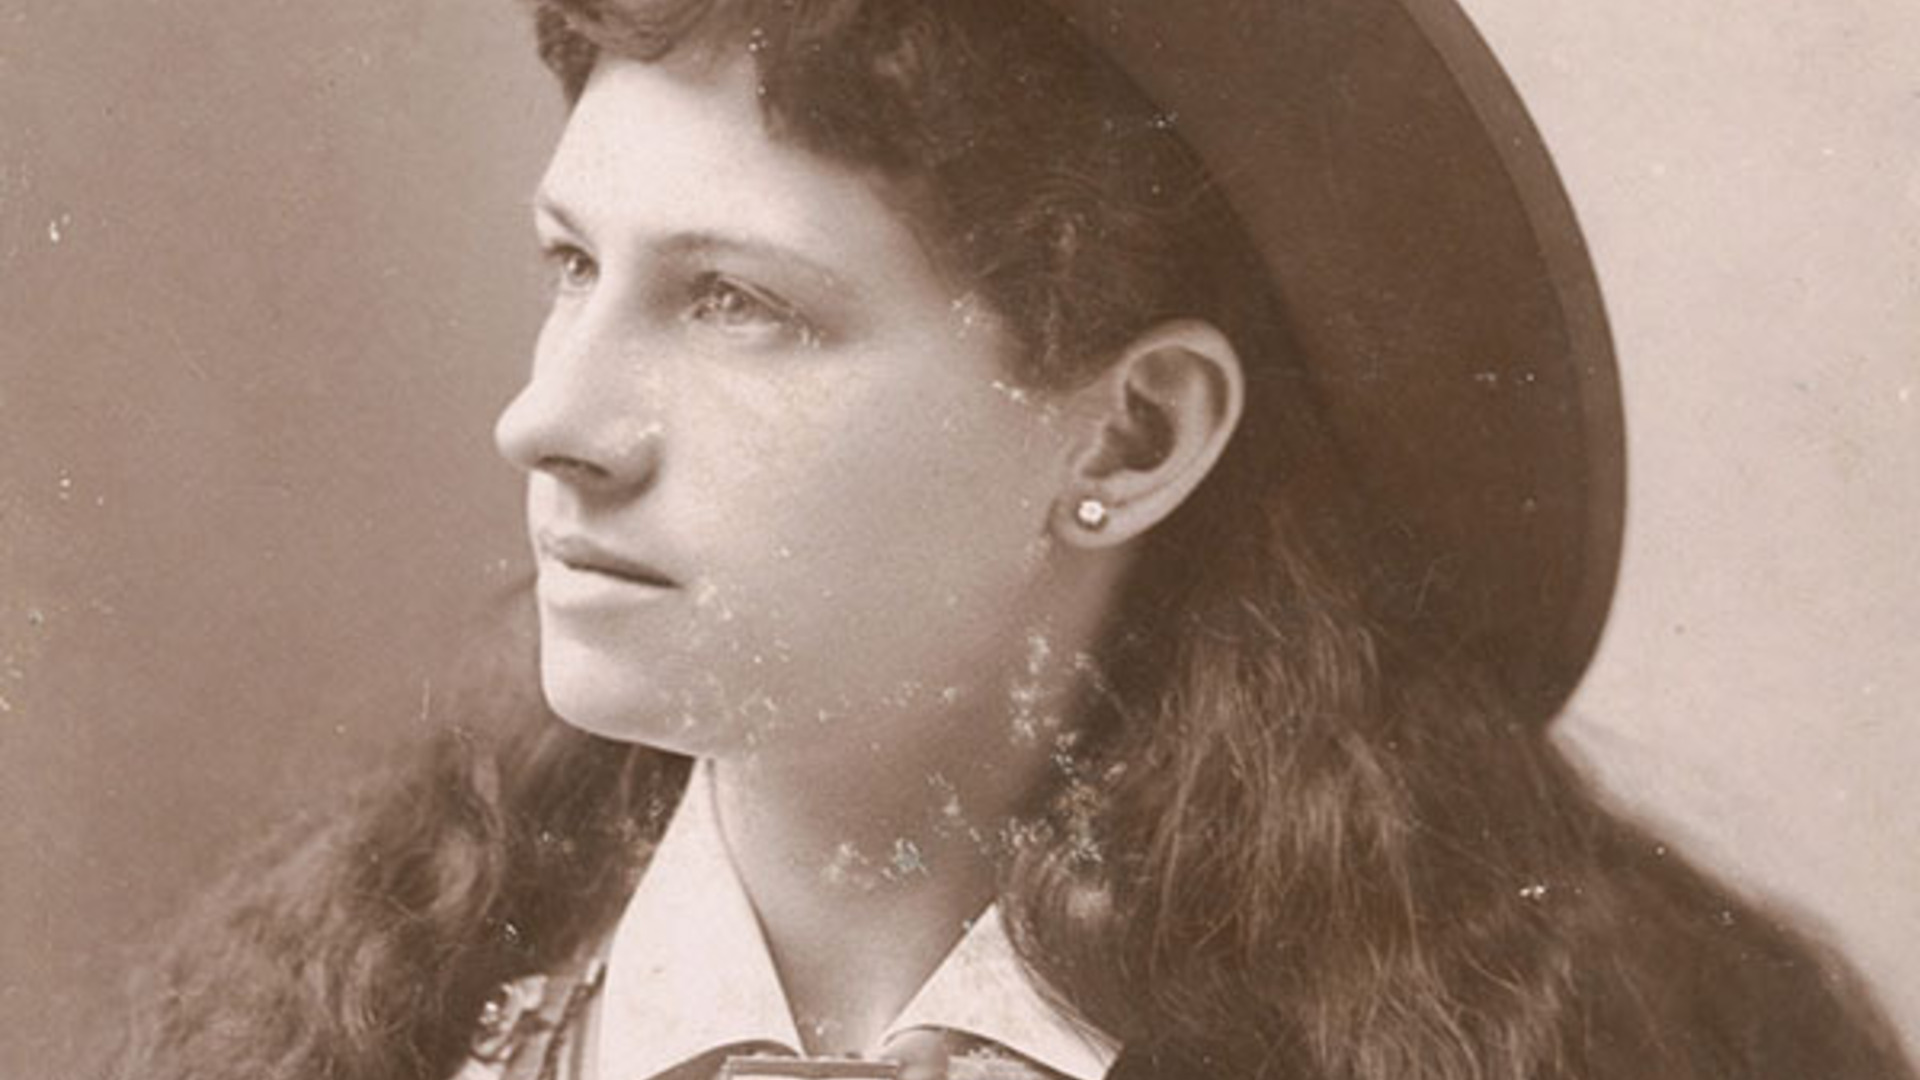 Charles E. Stacey, American, <i>Annie Oakley, </i>ca. 1891, albumen print mounted on cardboard, 5.55 x 3.9 inches. Acquired with funds provided by the Mr. and Mrs. Raymond T. Duncan Endowment for American Art. 2014.001.084